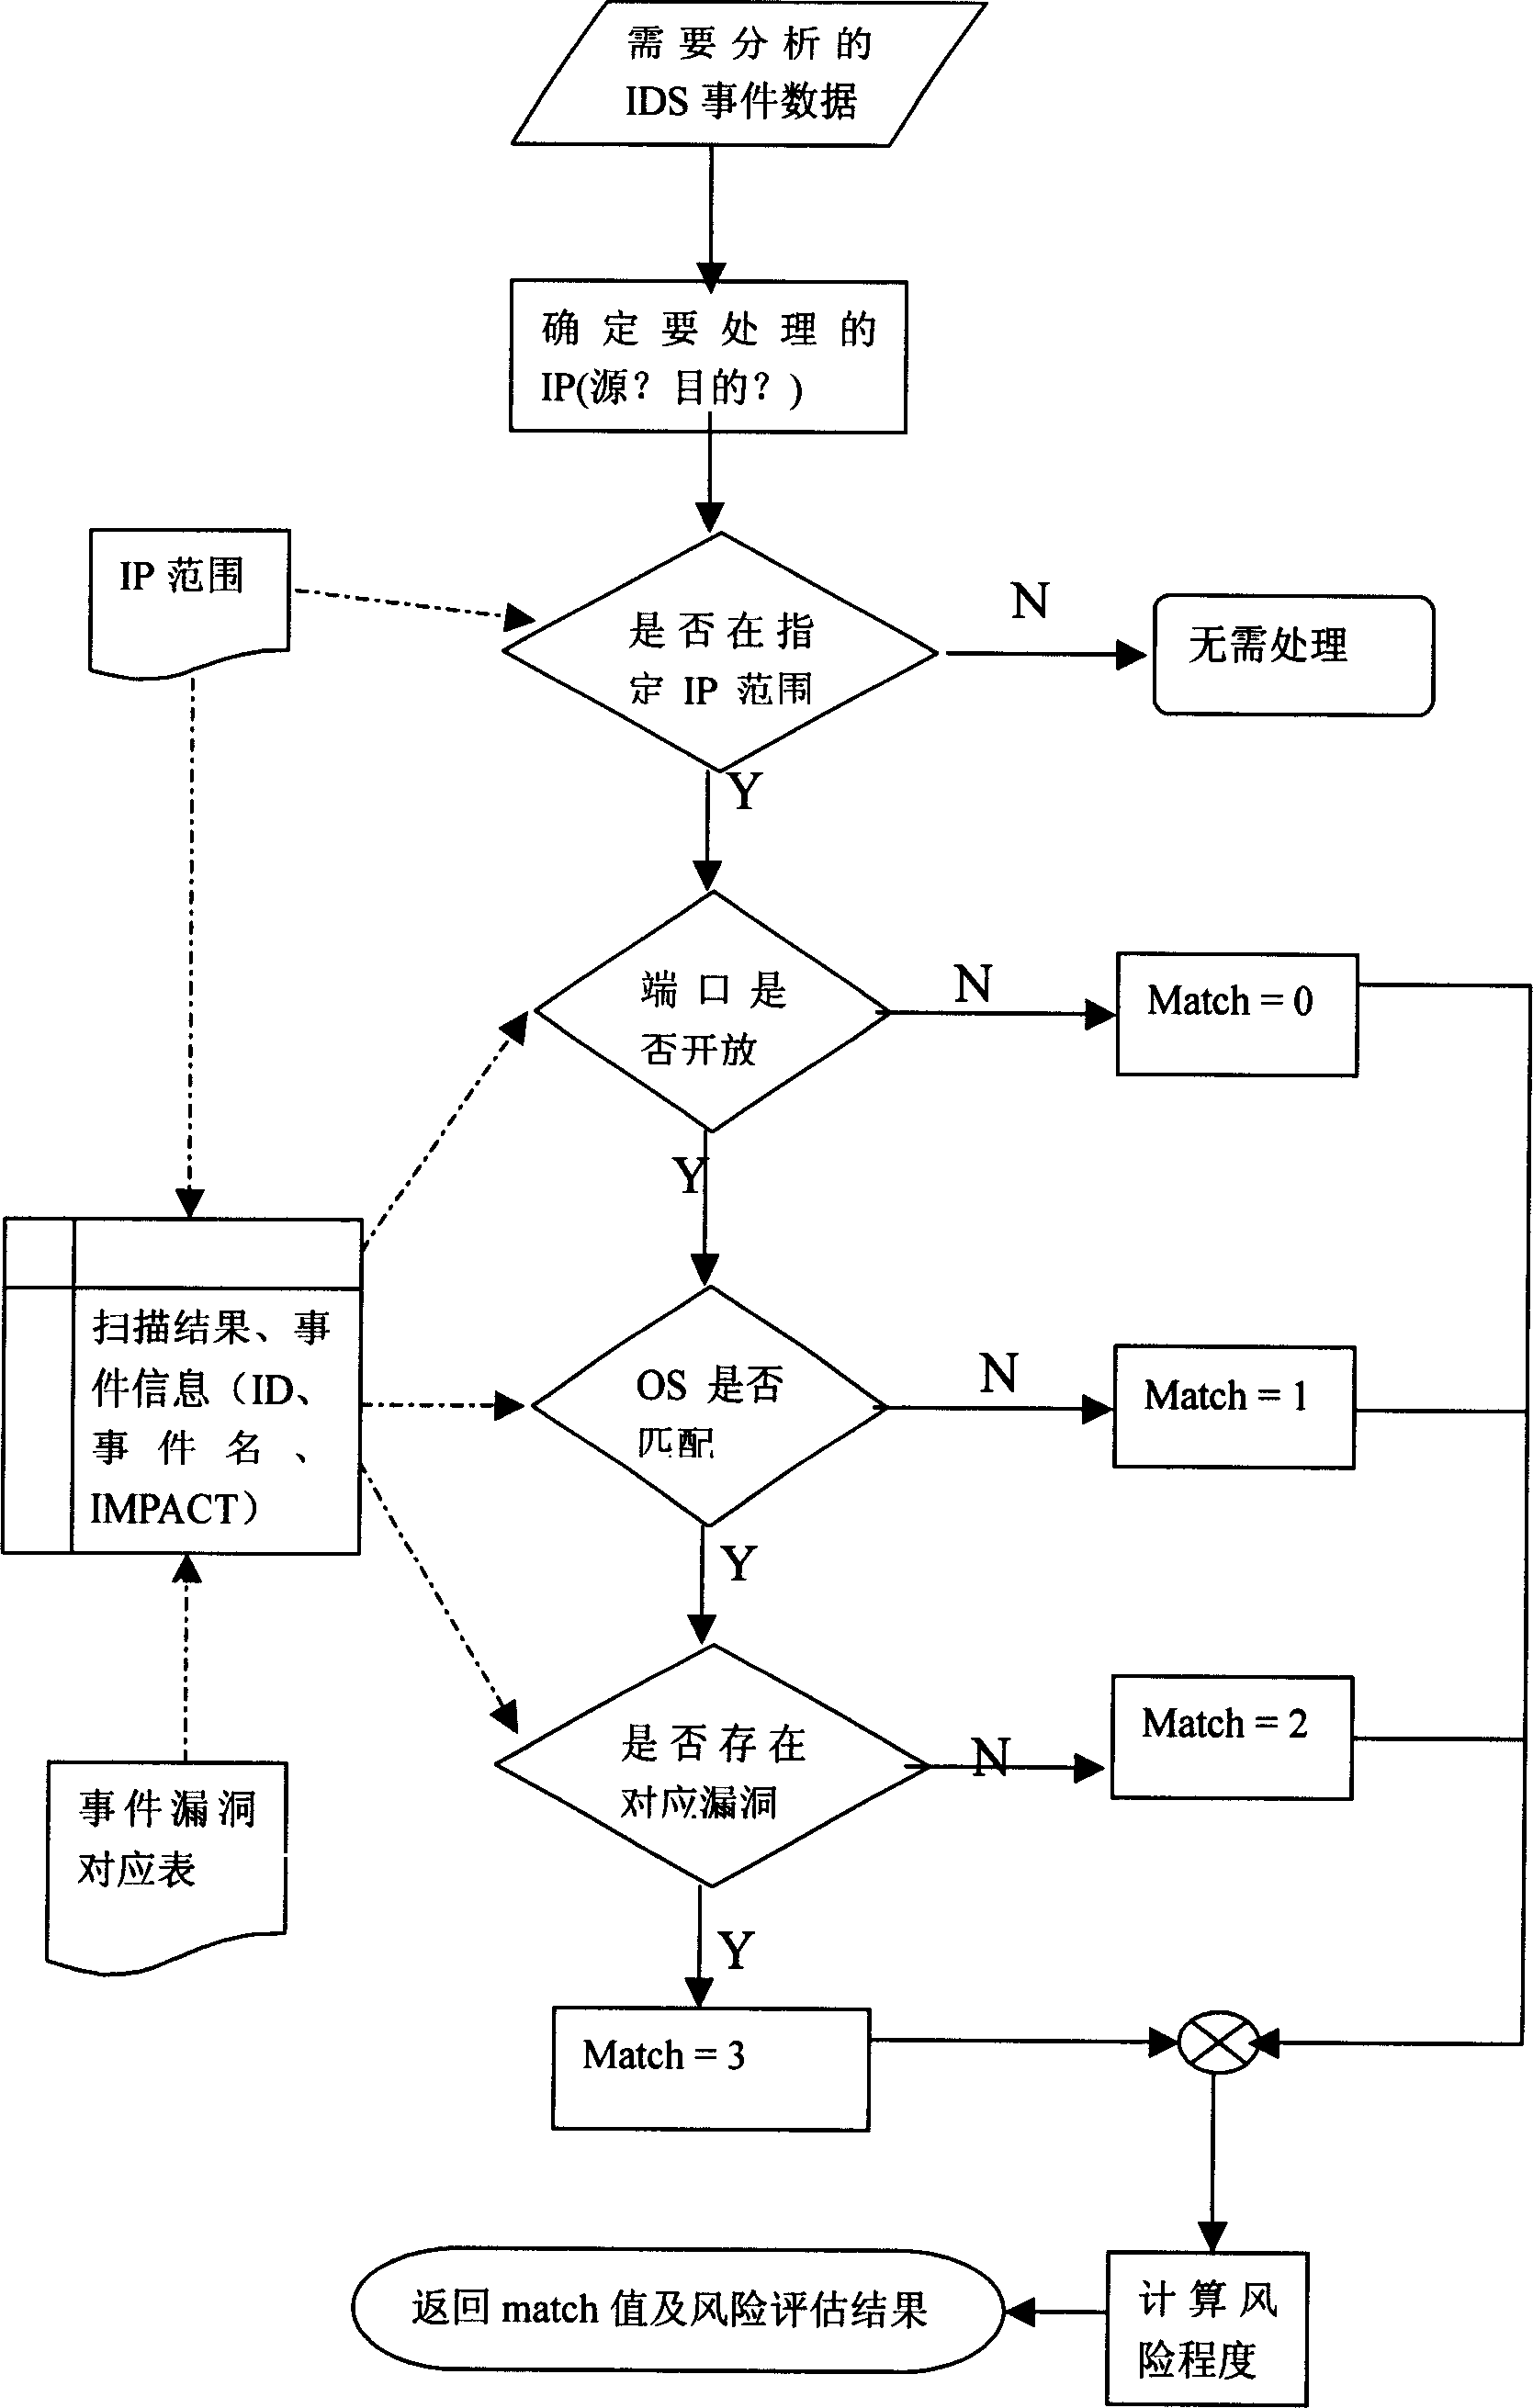 Network invading event risk evaluating method and system